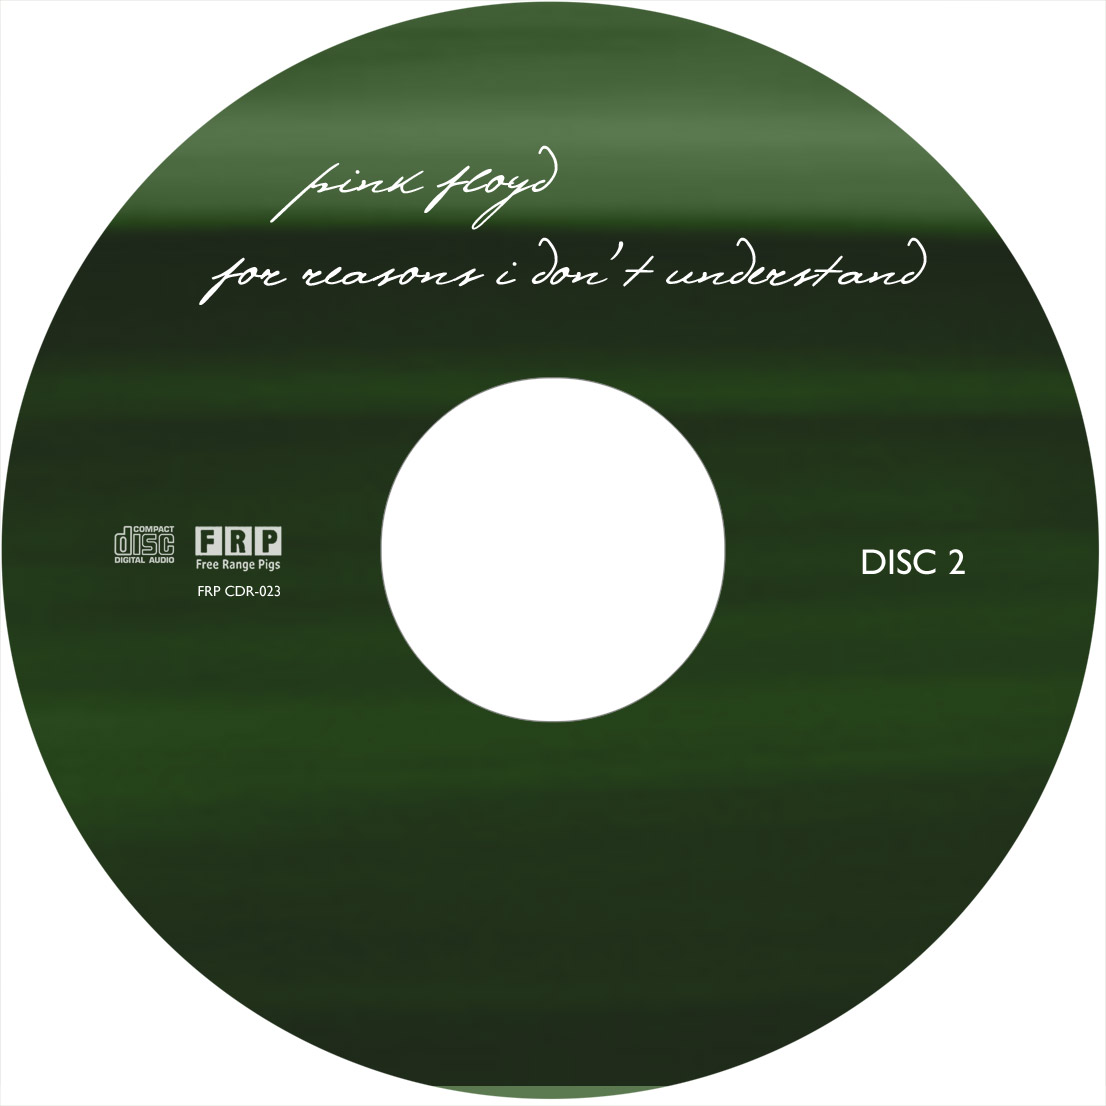 1971-11-06-For_reasons_I_don't_understand-cd2